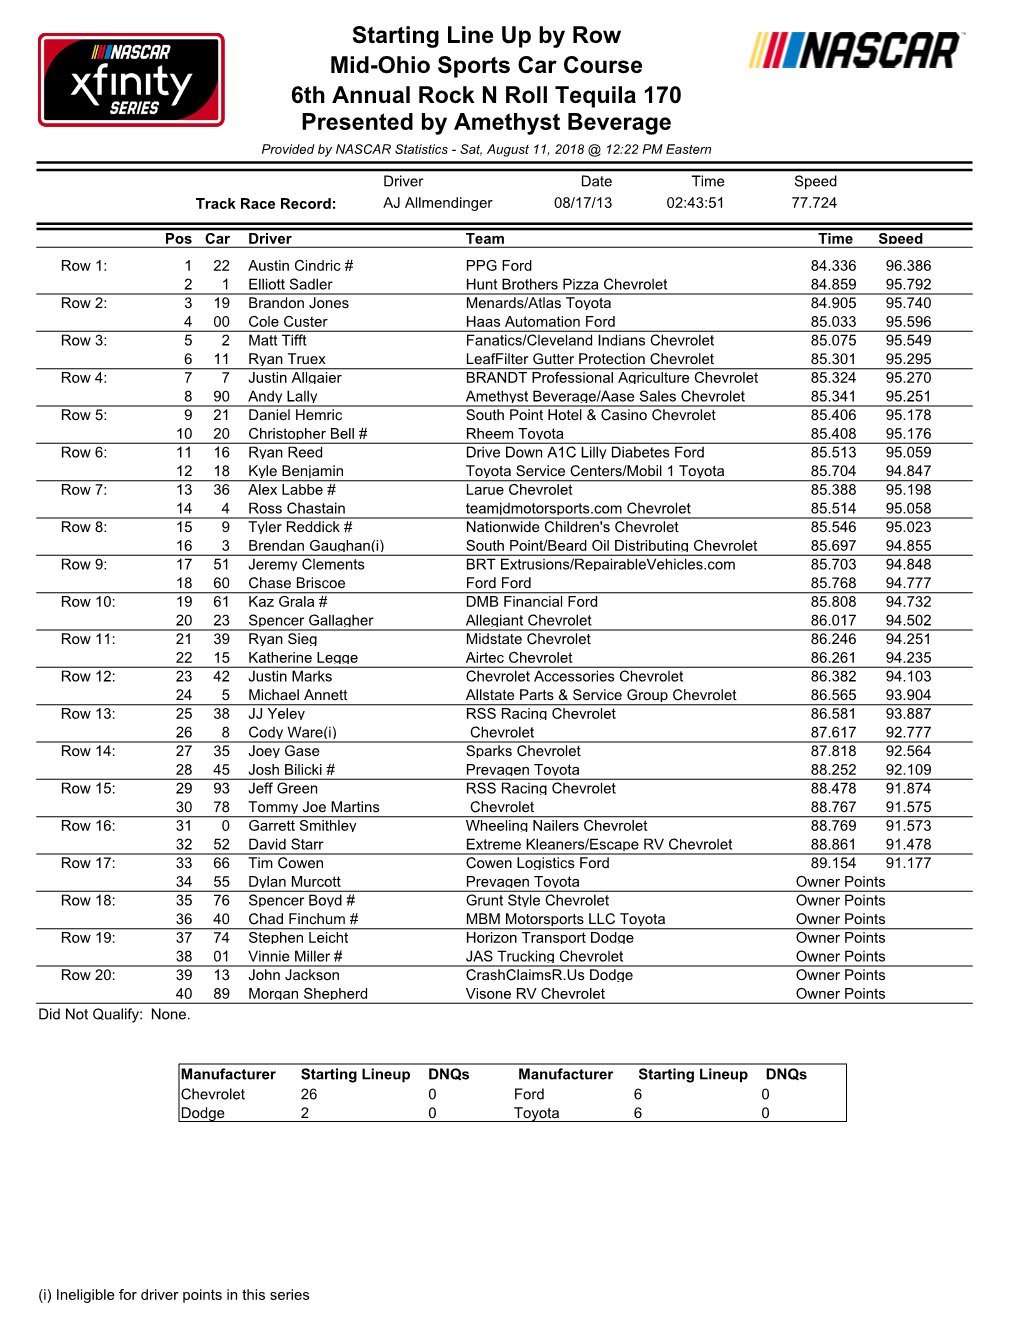 Lineup Dnqs Manufacturer Starting Lineup Dnqs Chevrolet 26 0 Ford 6 0 Dodge 2 0 Toyota 6 0